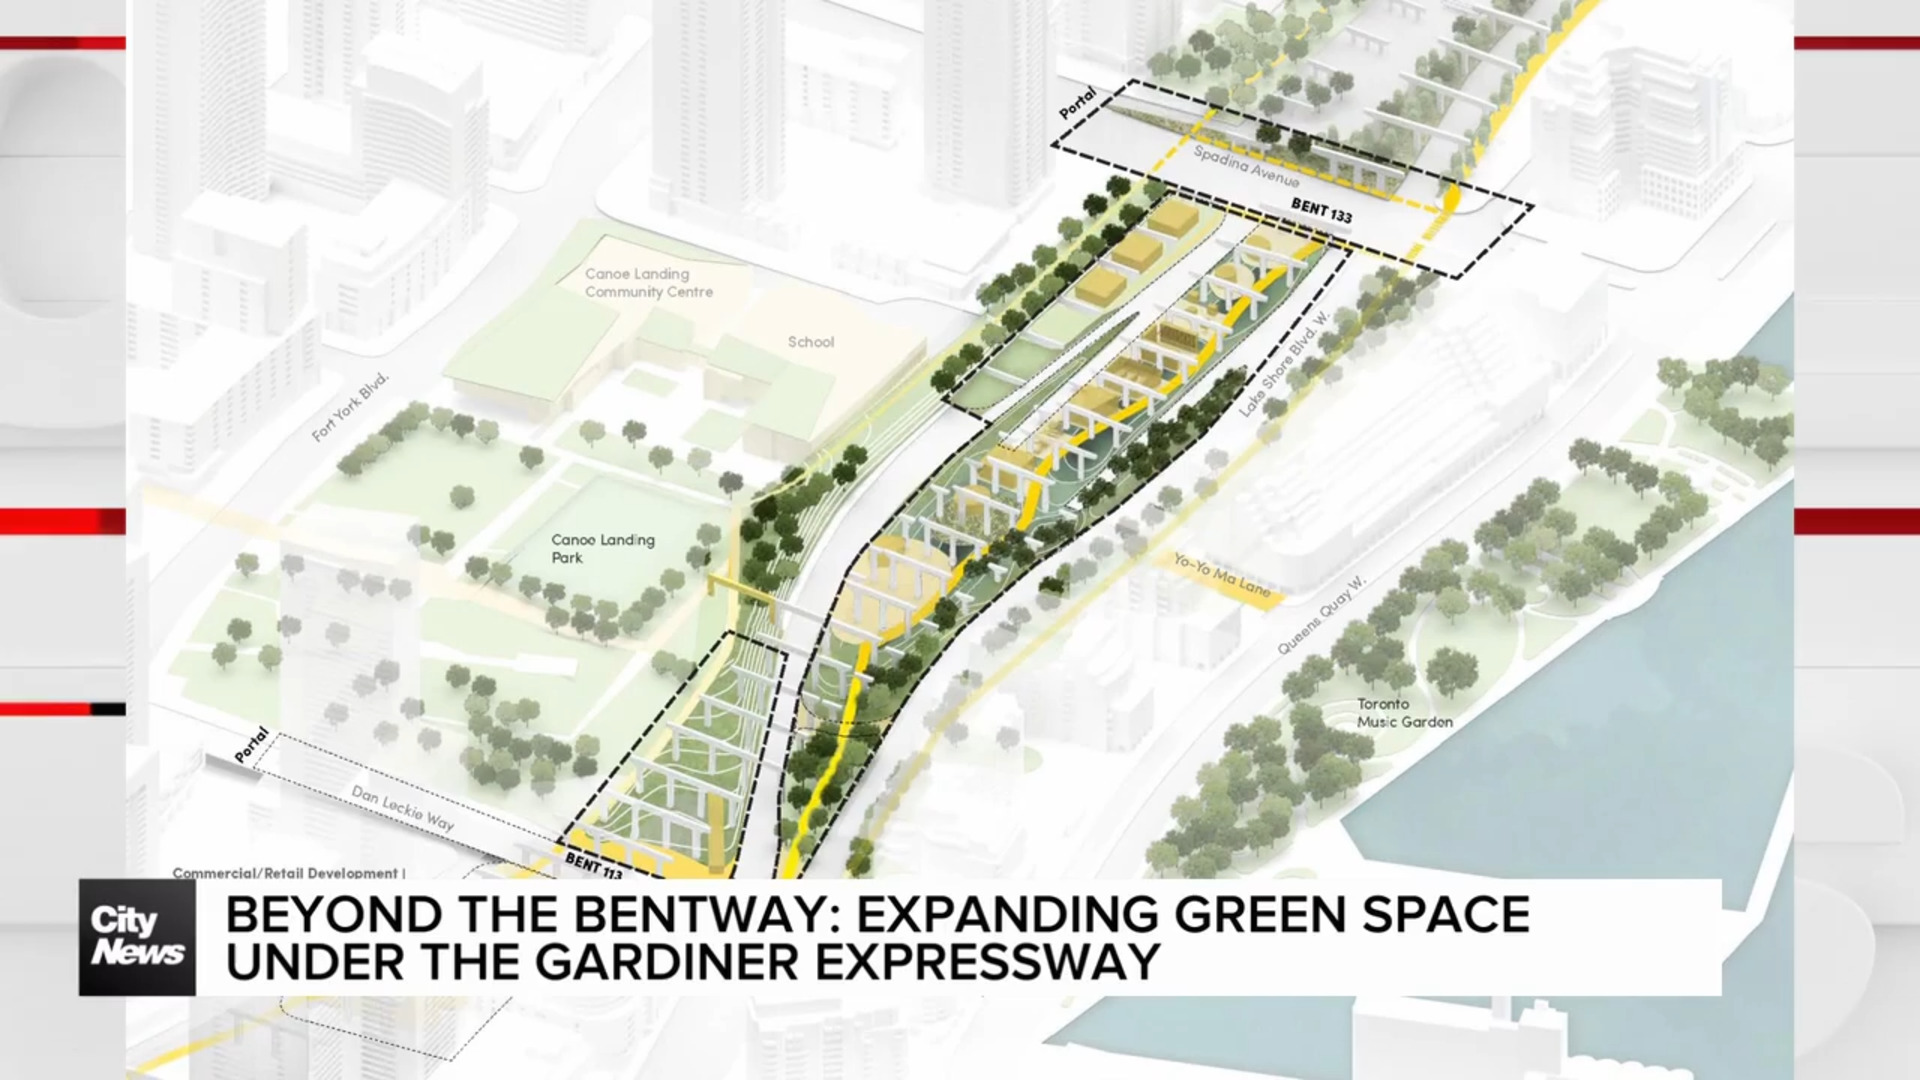 Beyond the Bentway: More proposed public space under the Gardiner